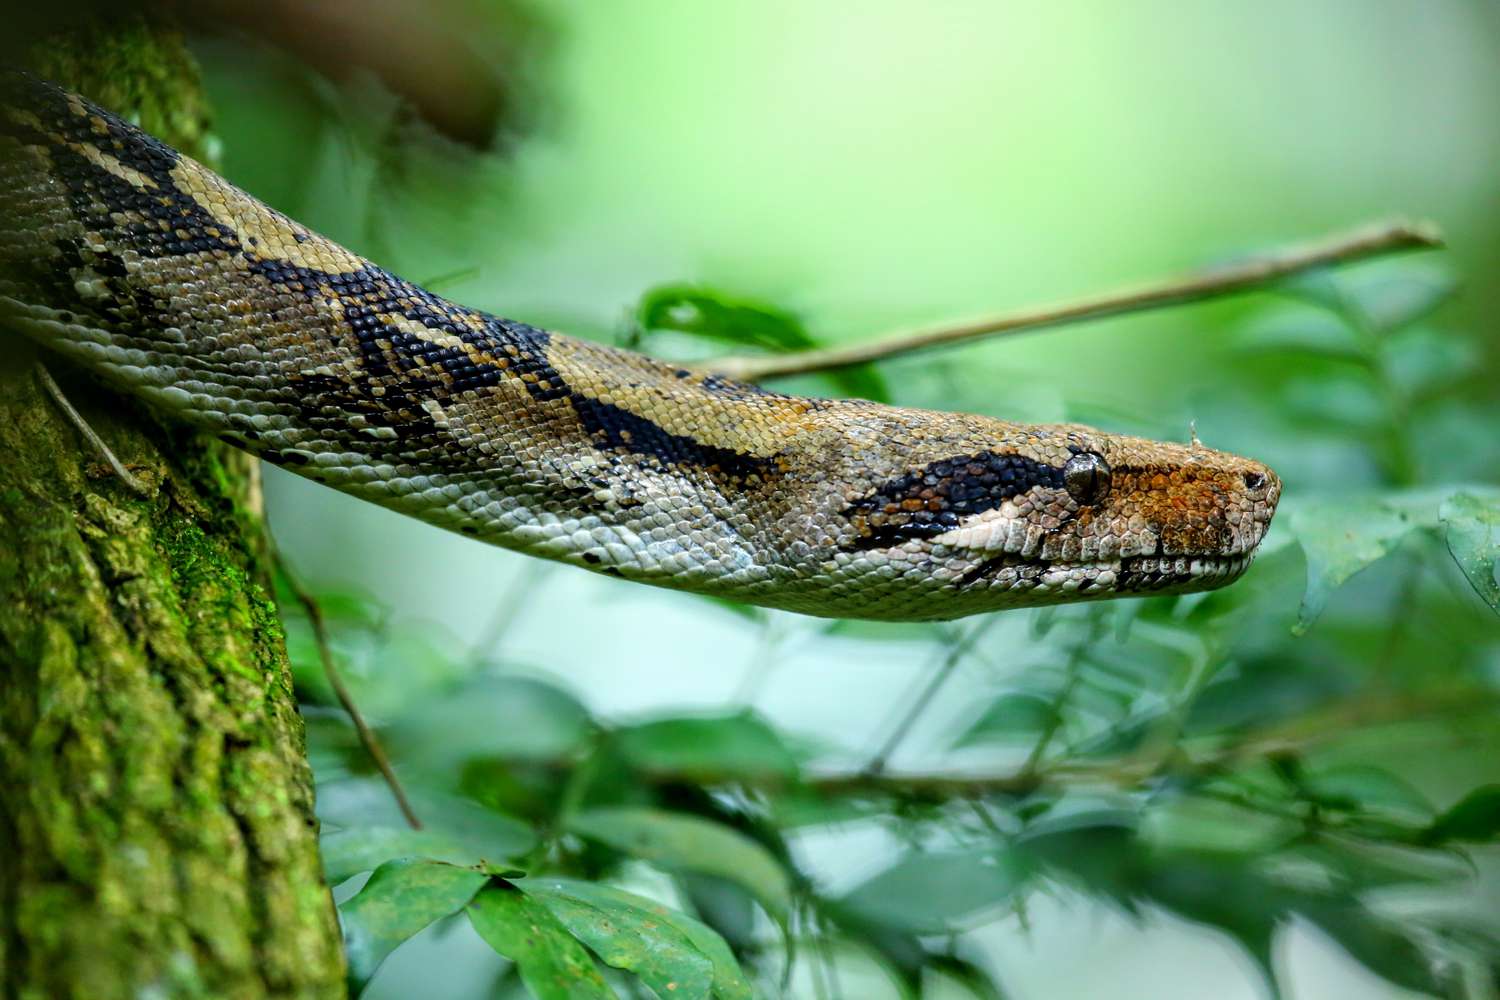 10 Fascinating Facts About Boa Constrictors You Didn't Know